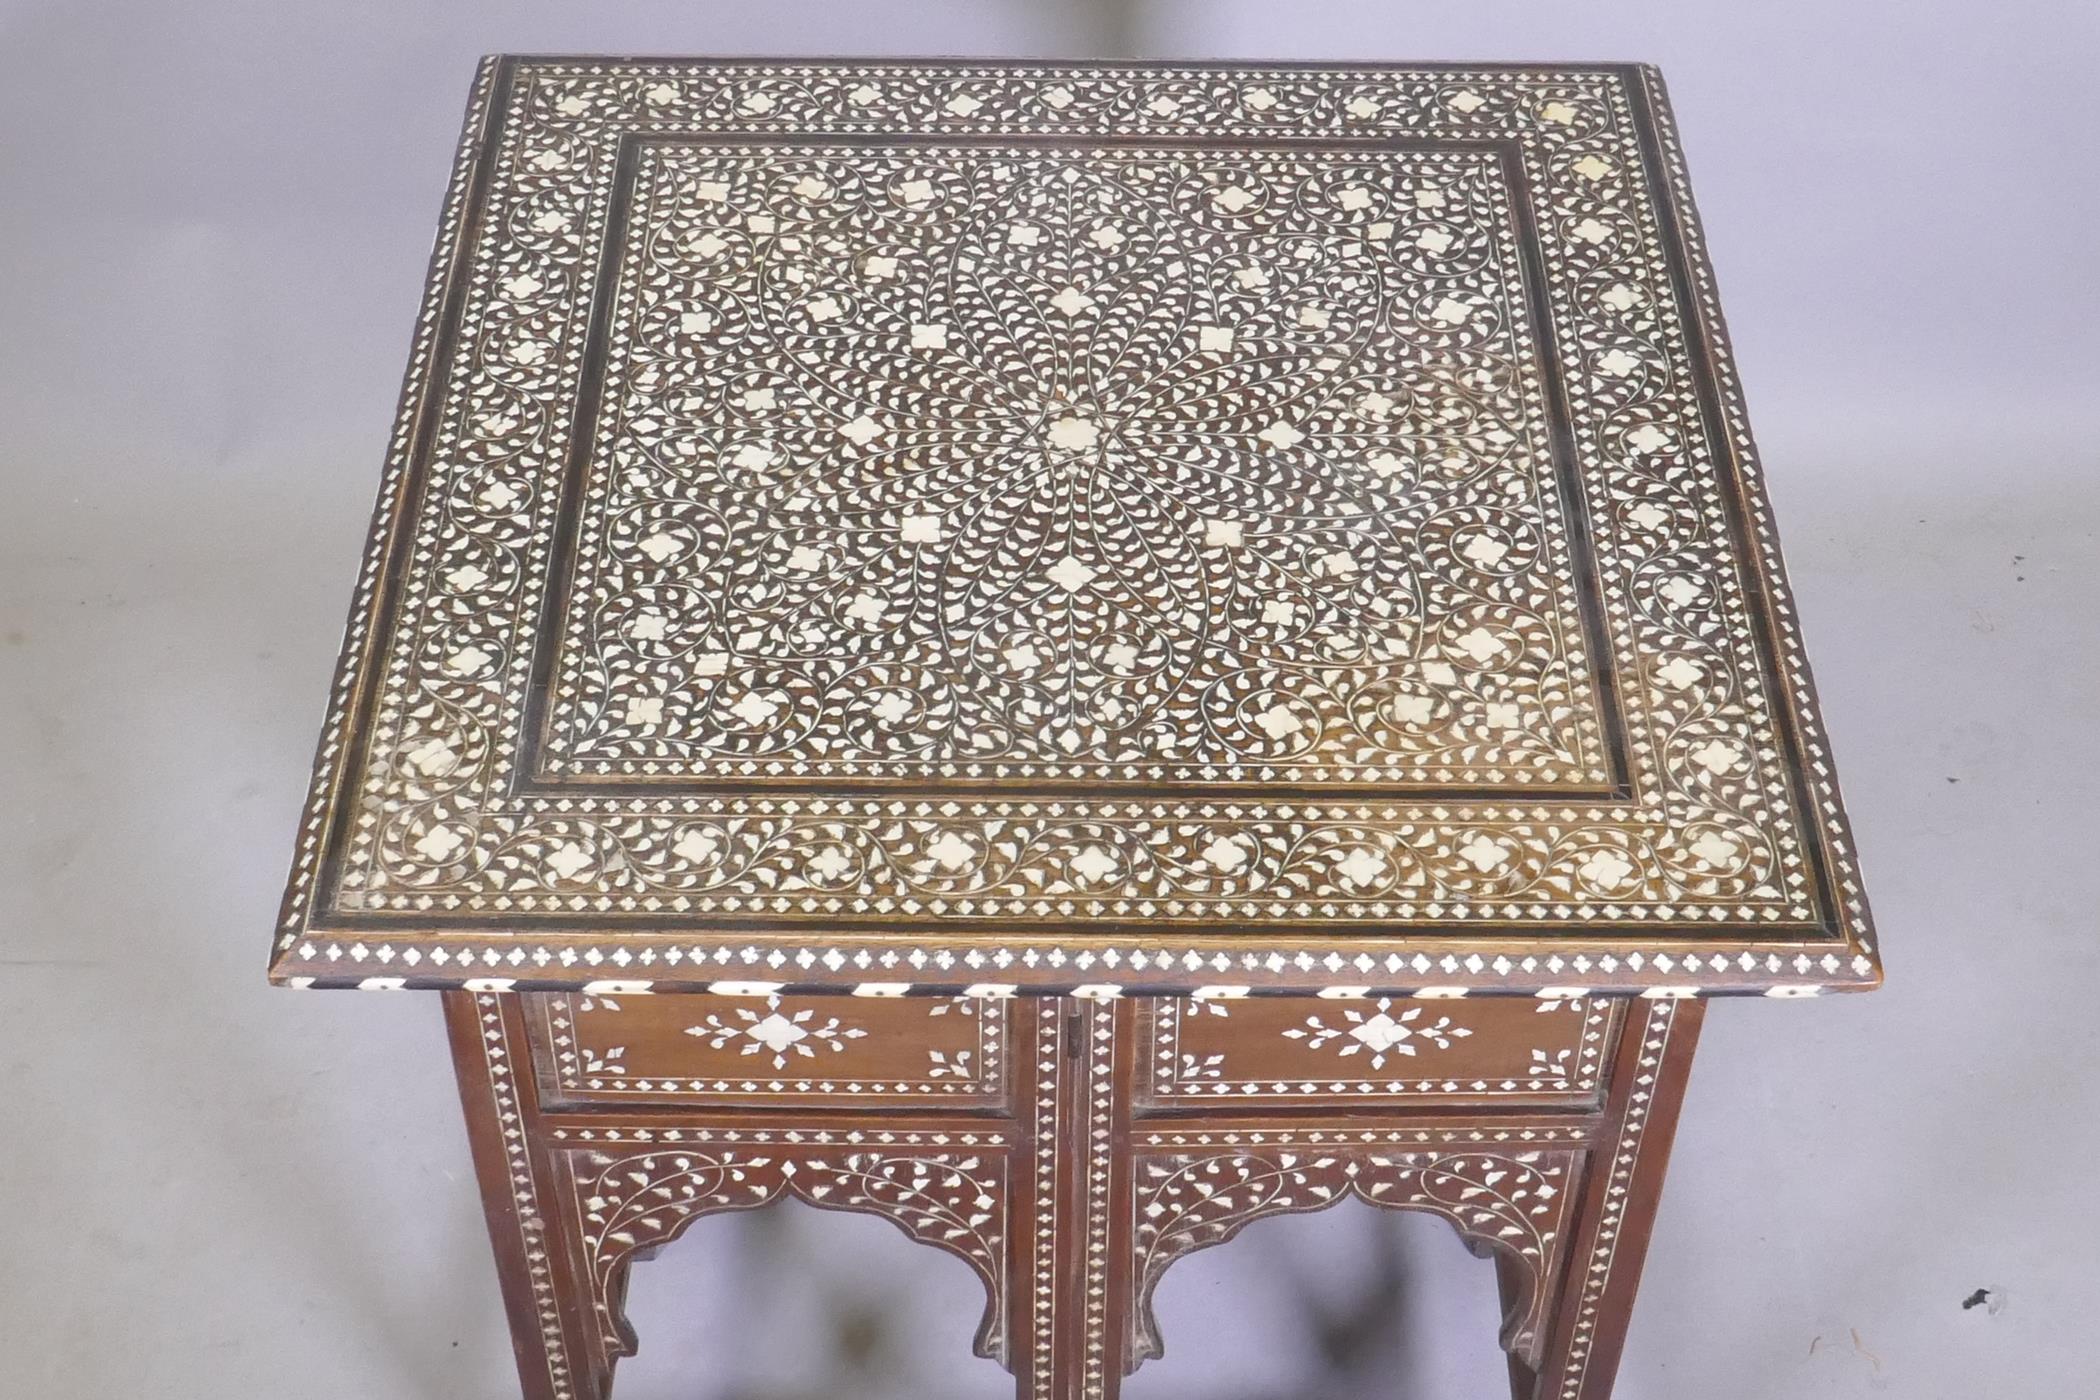 A C19th Moorish table with inlaid decoration and folding base, 61 x 61 x 63cm - Image 4 of 5